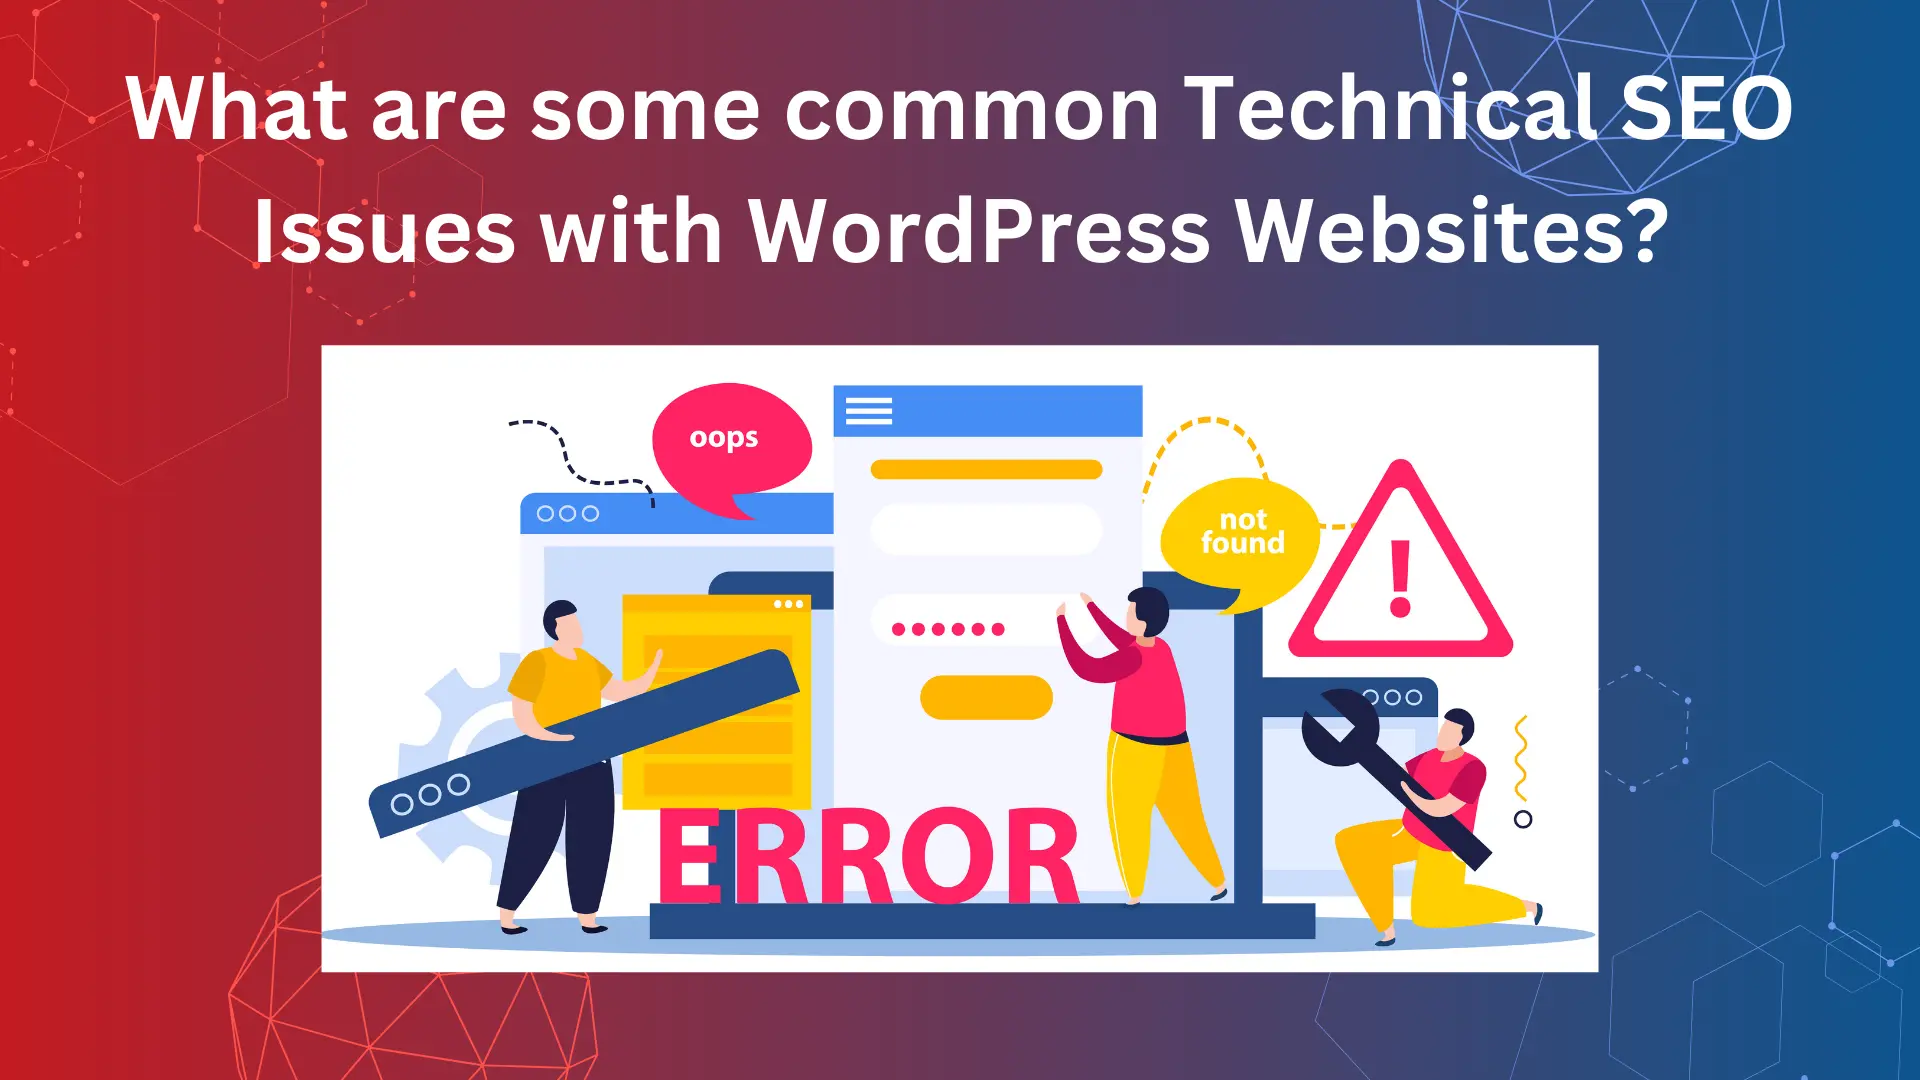 What are some Common Technical SEO Issues with WordPress Websites